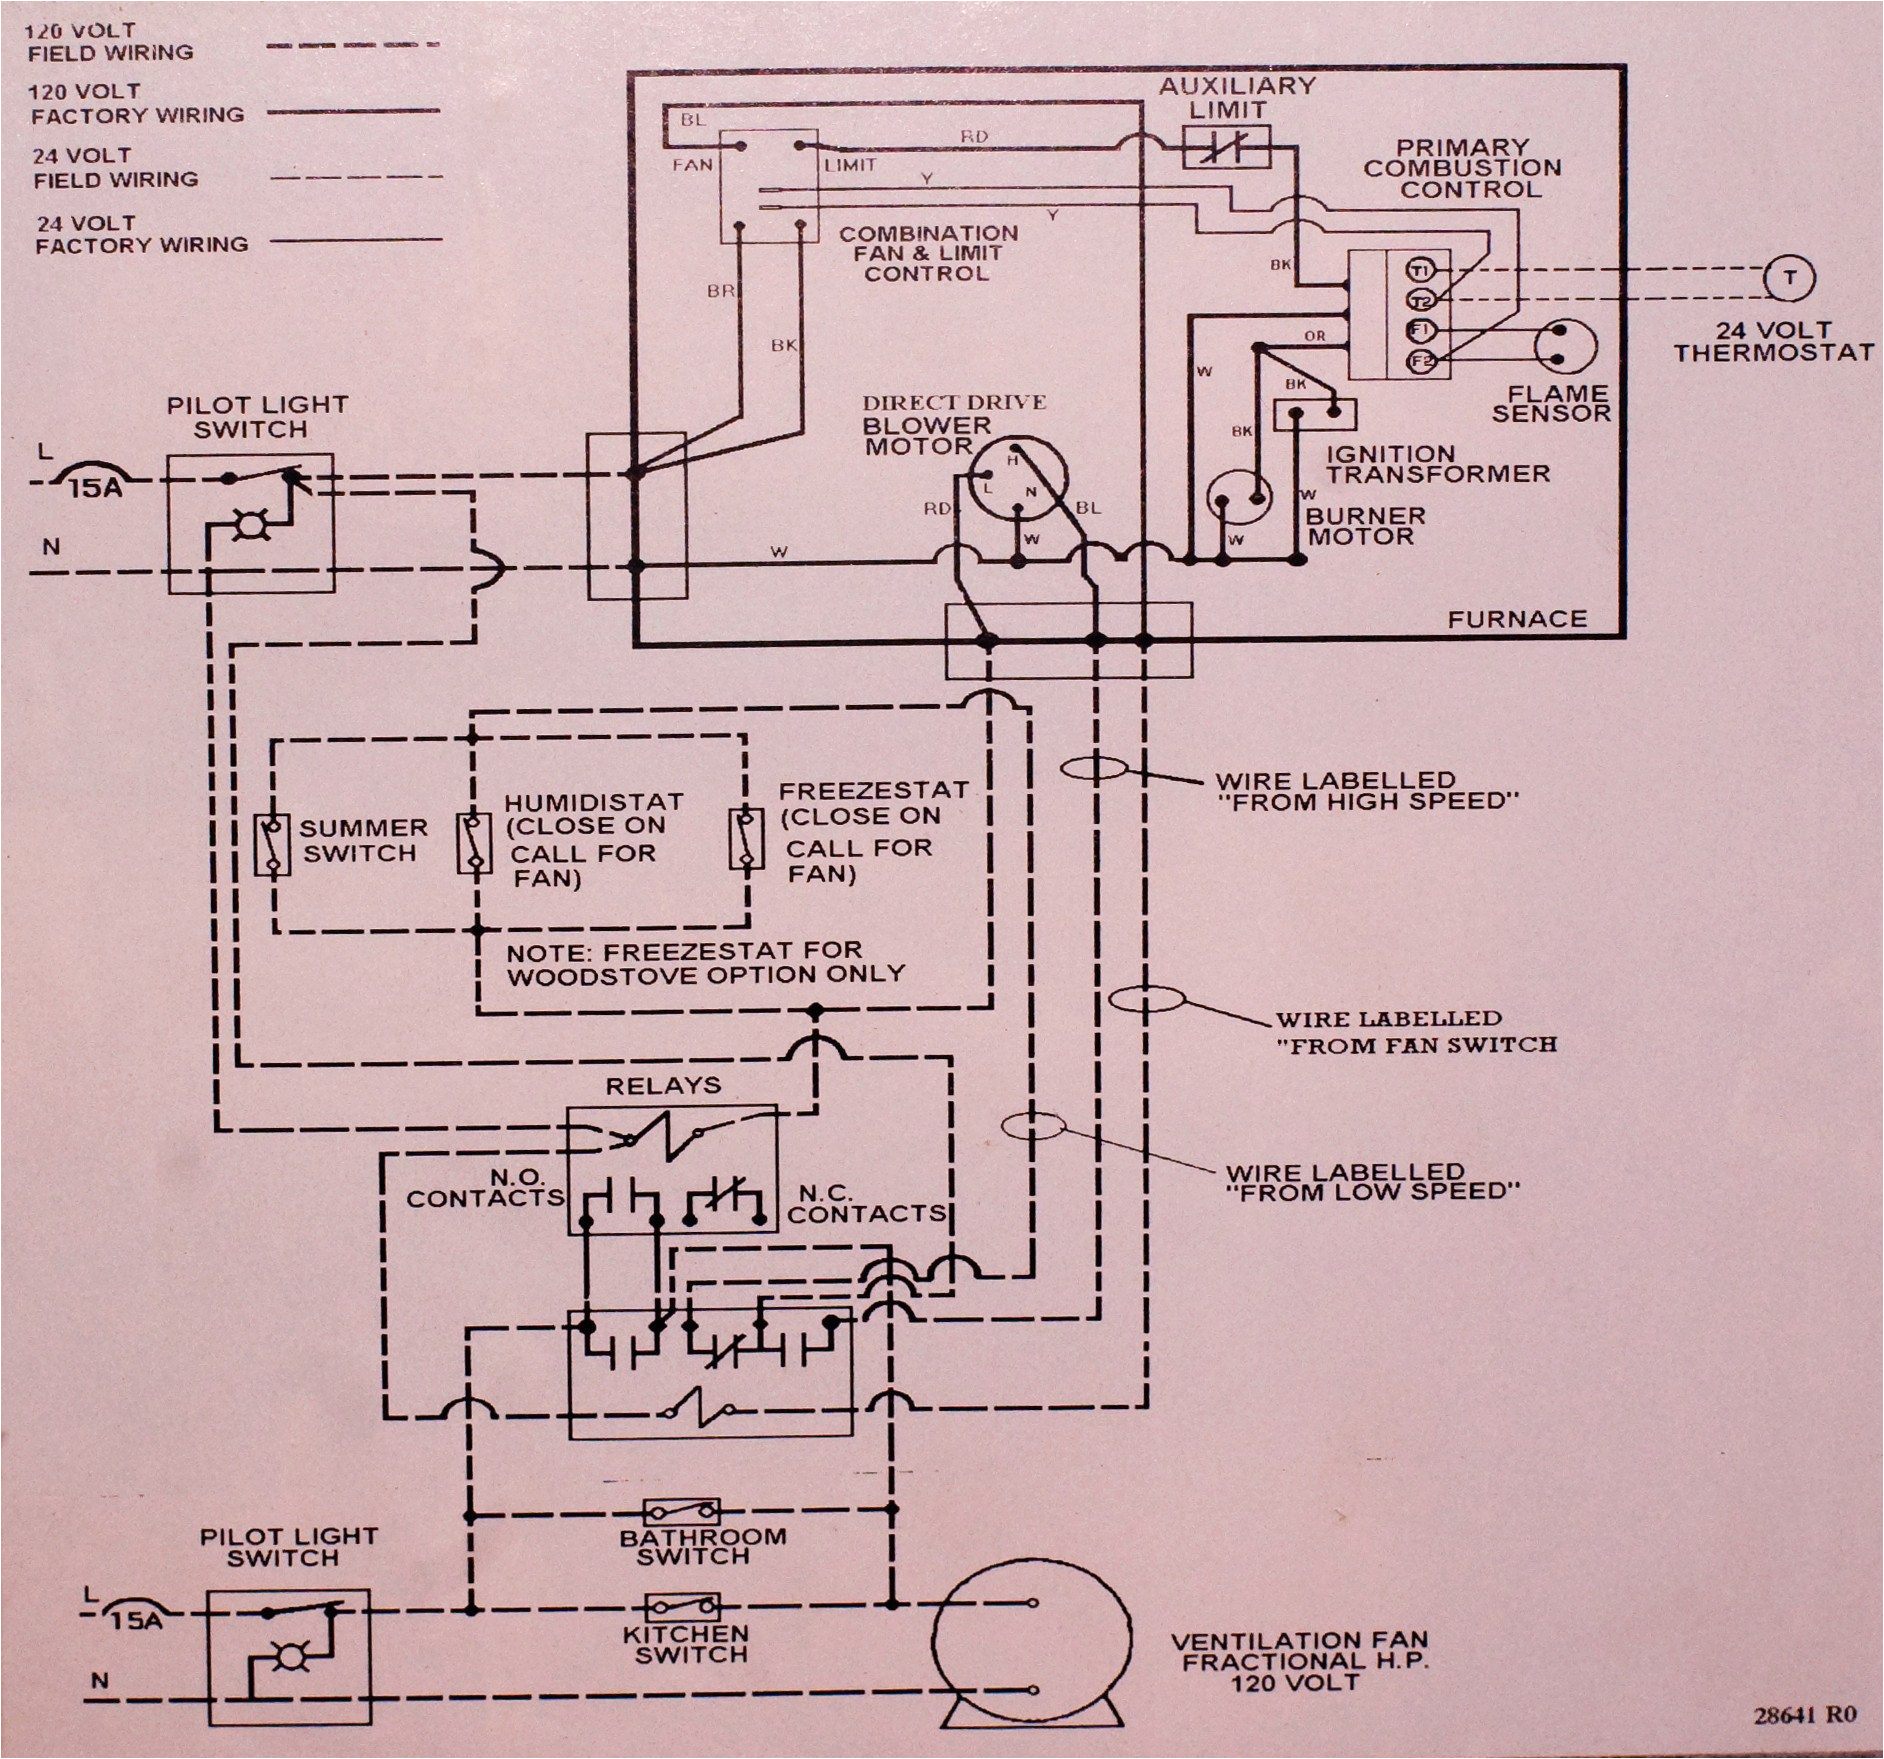 gas furnace wiring blog wiring diagram a typical furnace wiring schematic for gas